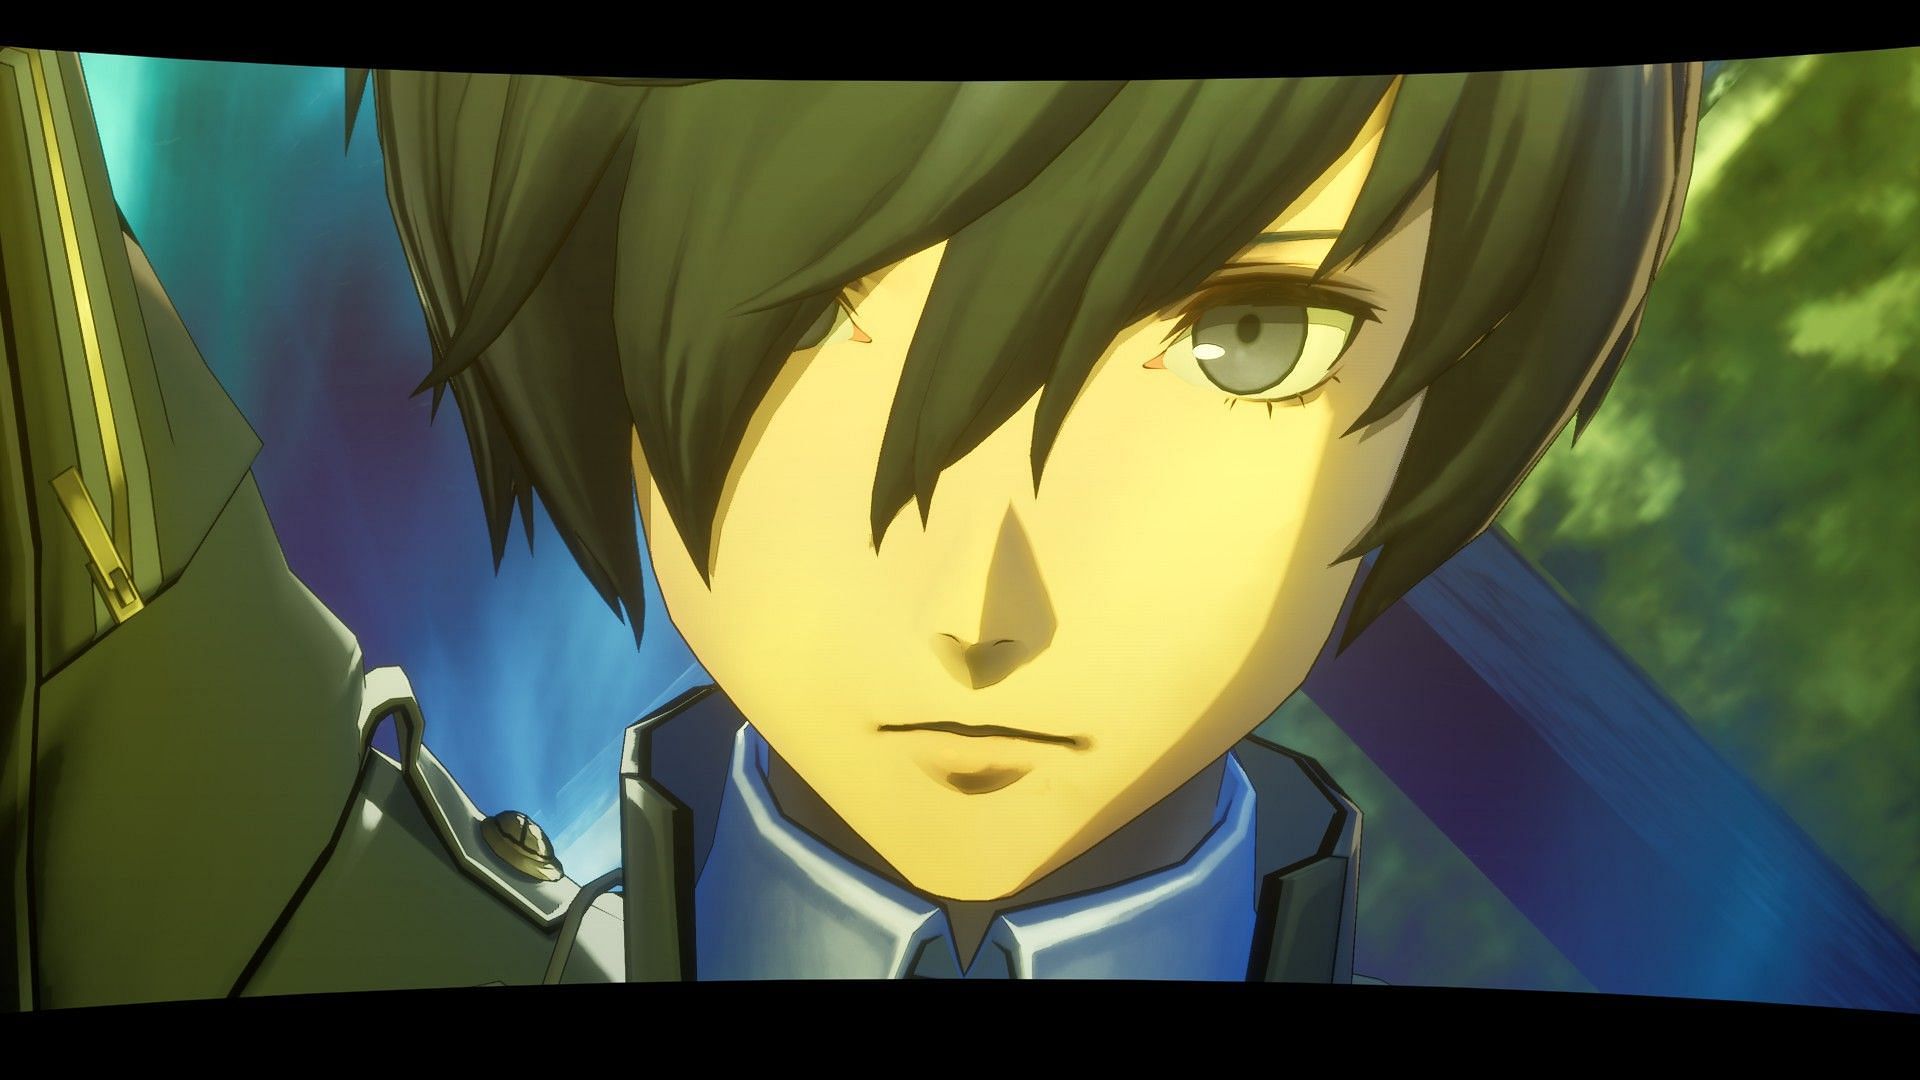 Persona 3 Reload ending explained: The Great Seal (Image via Atlus)